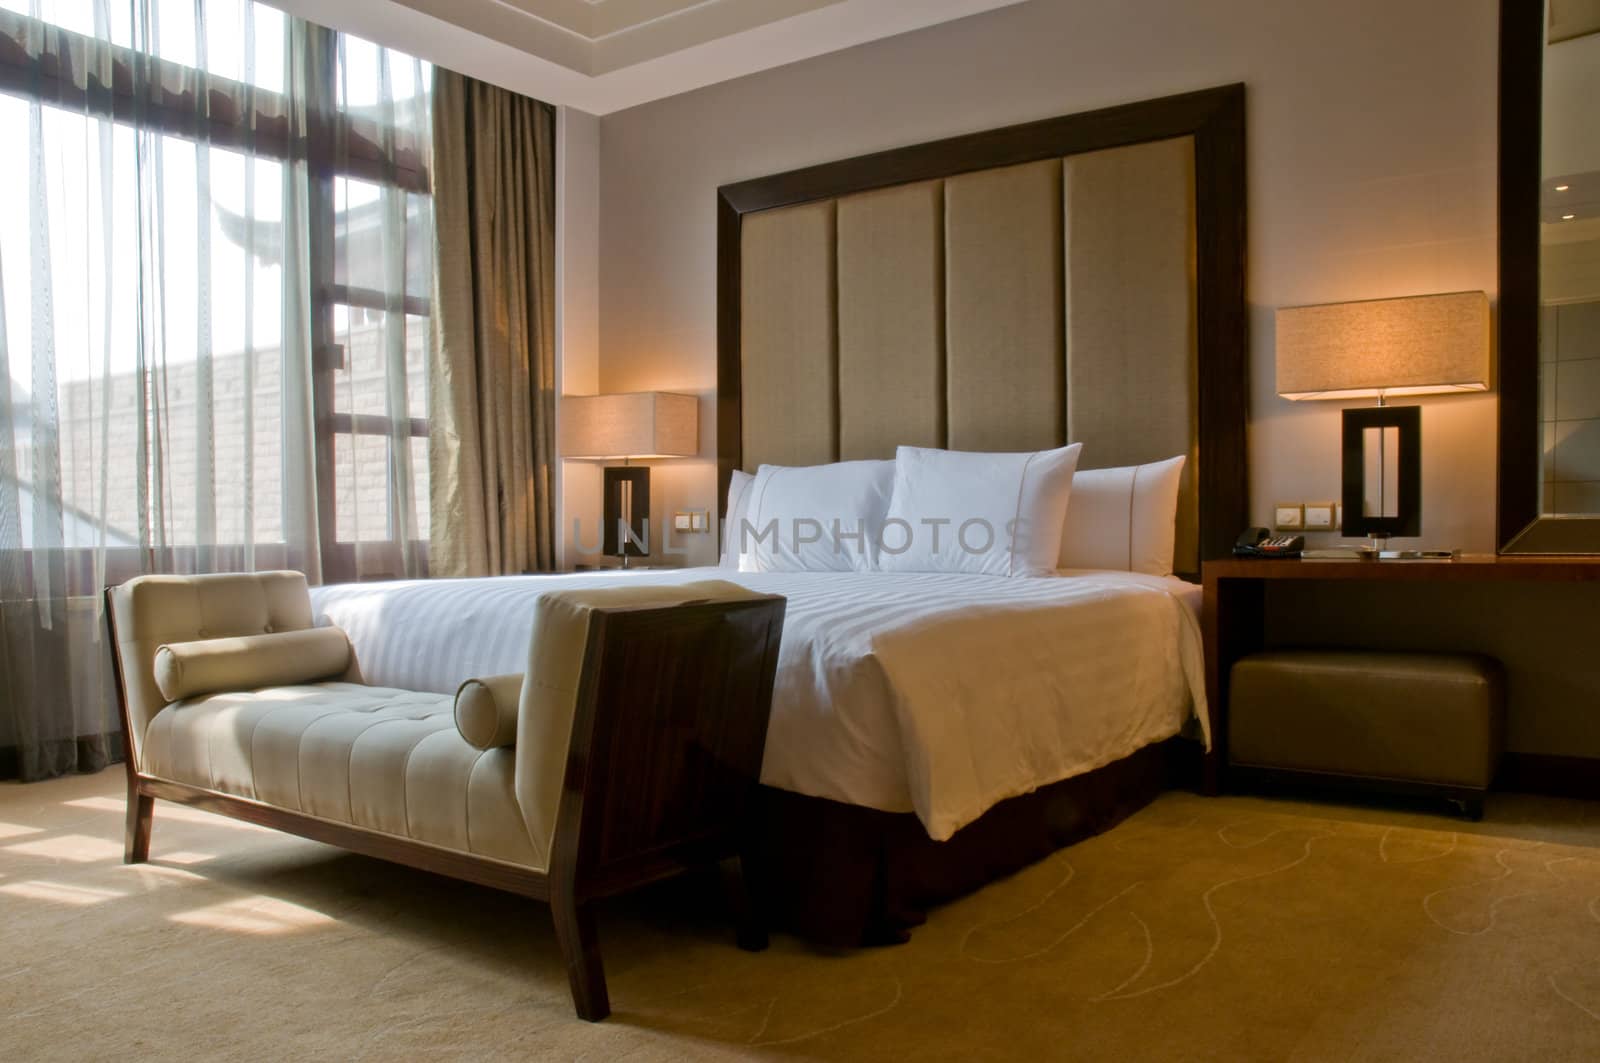 Bedroom of a elegant 5 star hotel suite room at a sunny day